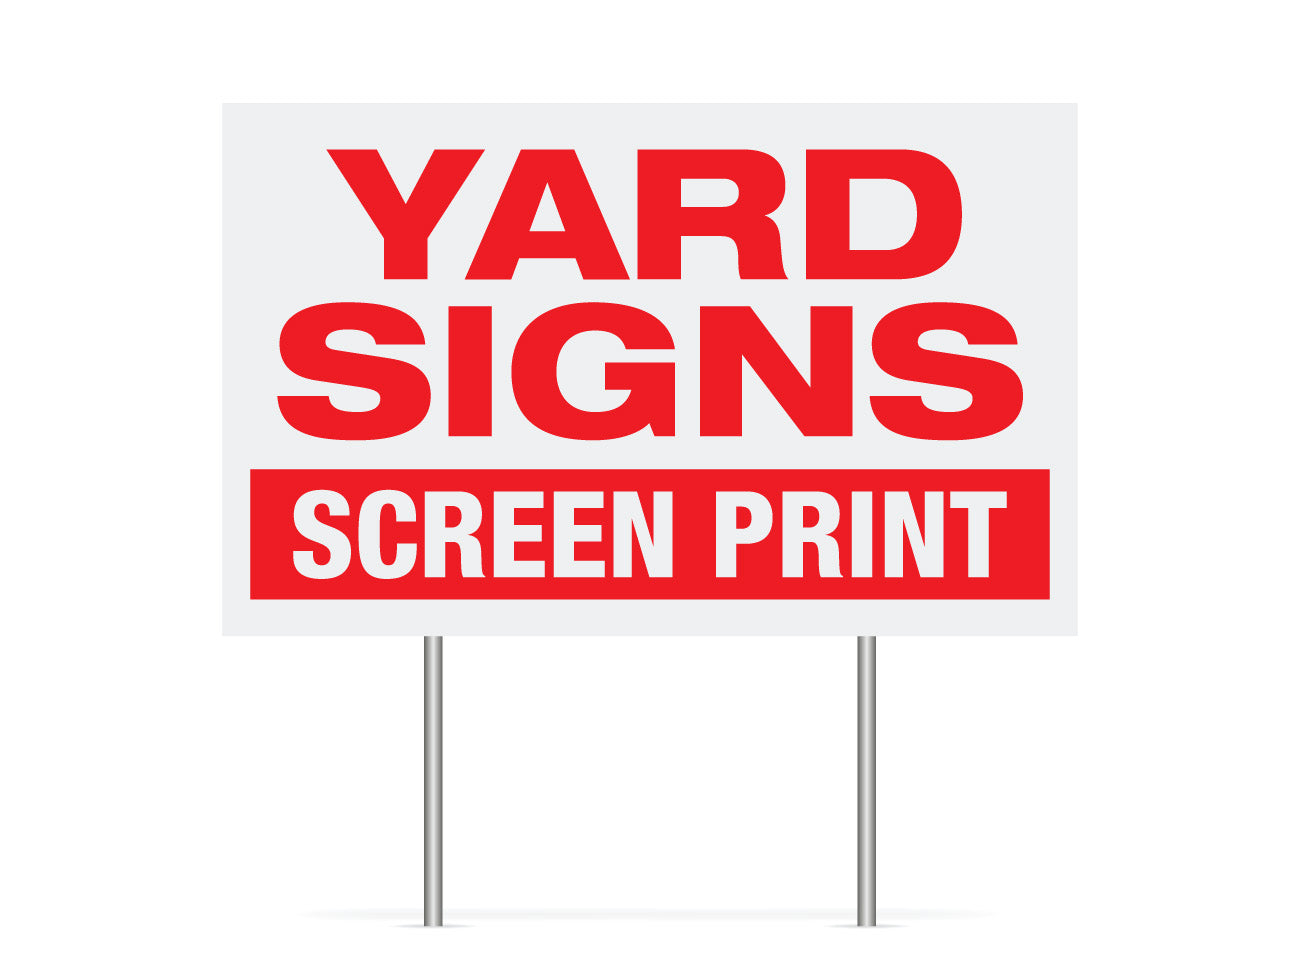 Custom Yard Signs.  Screen printed yard signs available in 1 color, 2 color and 3 color designs.  Step stakes available.